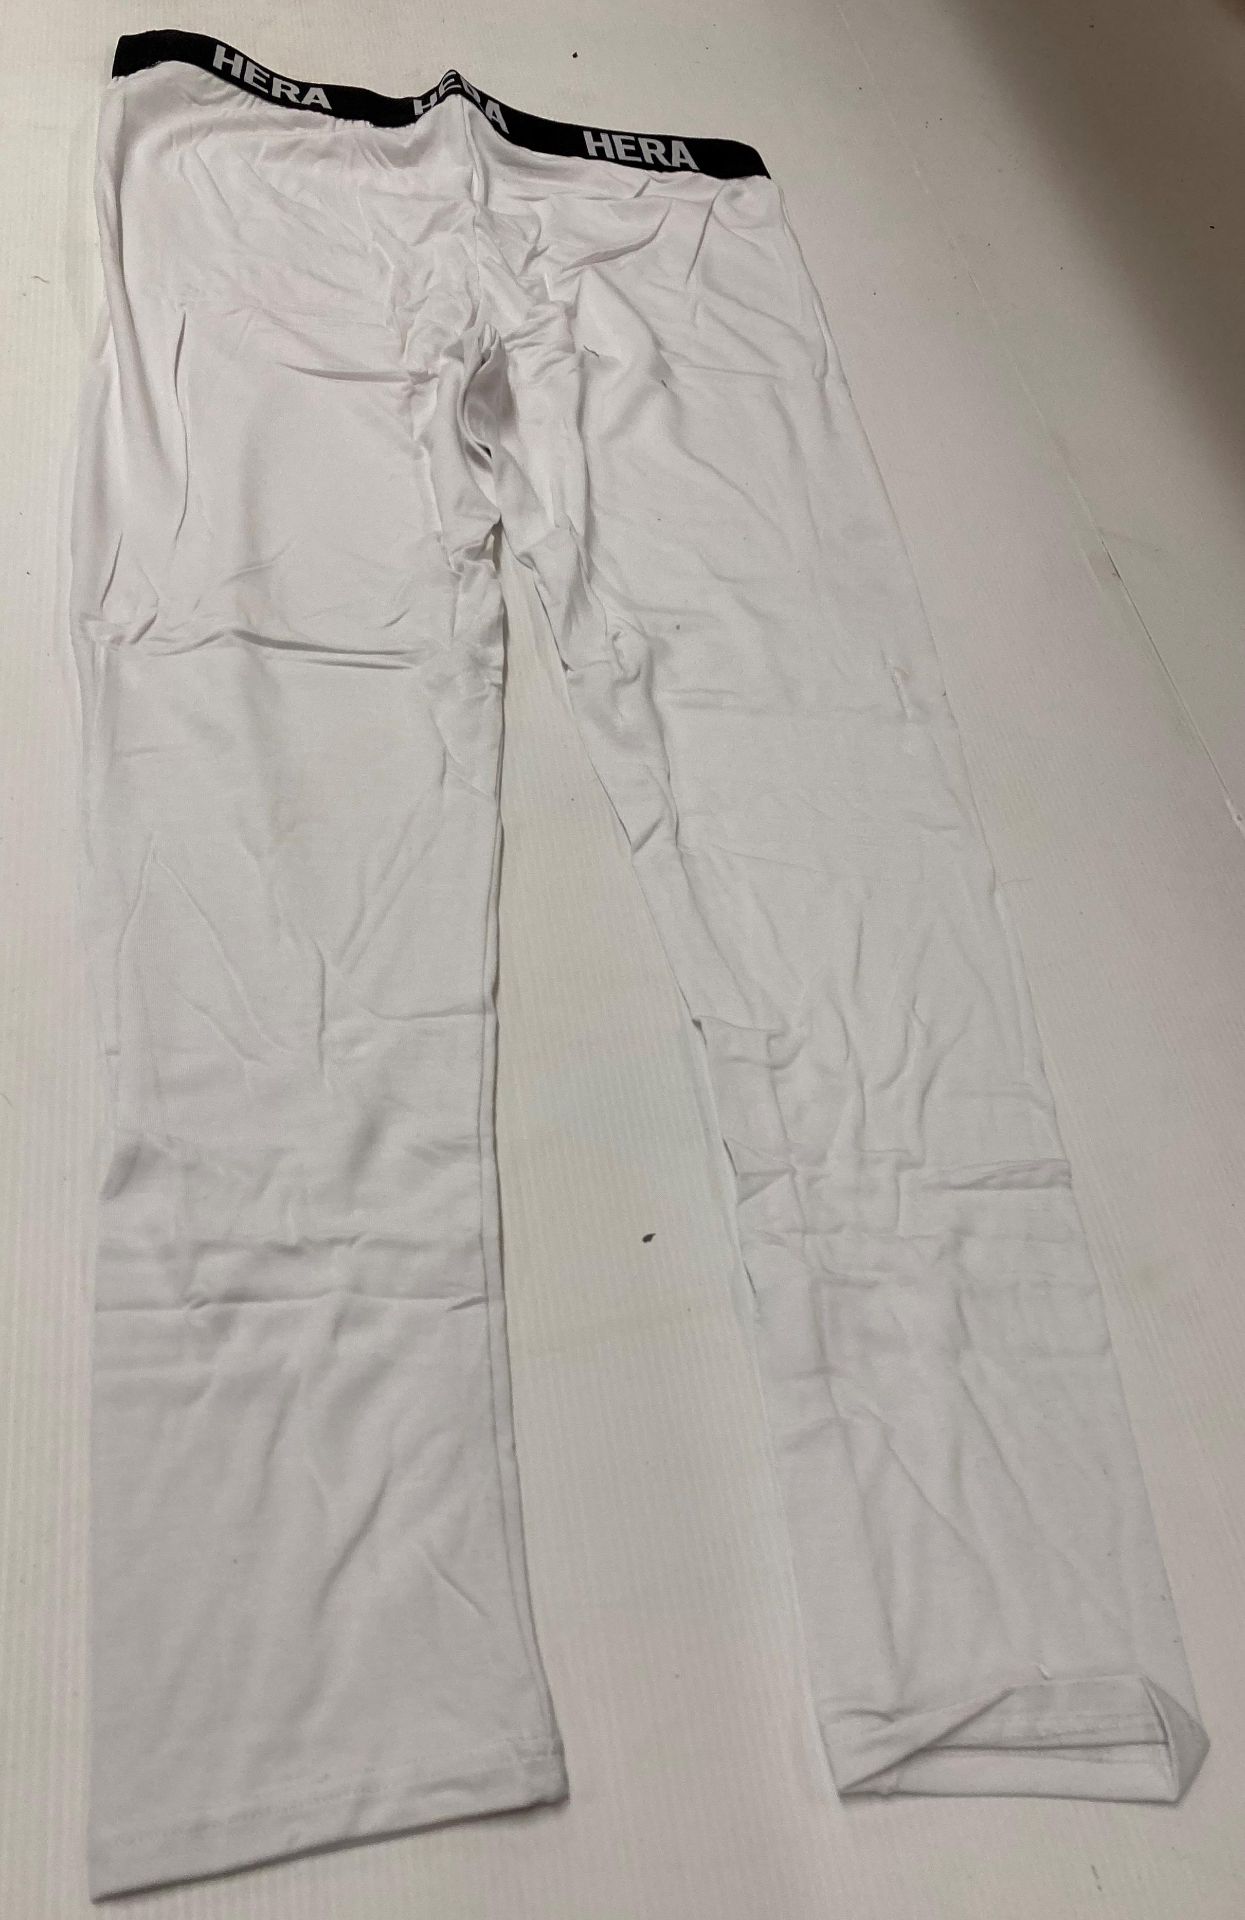 A pair of Hera white leggings - size XL (location: S02)